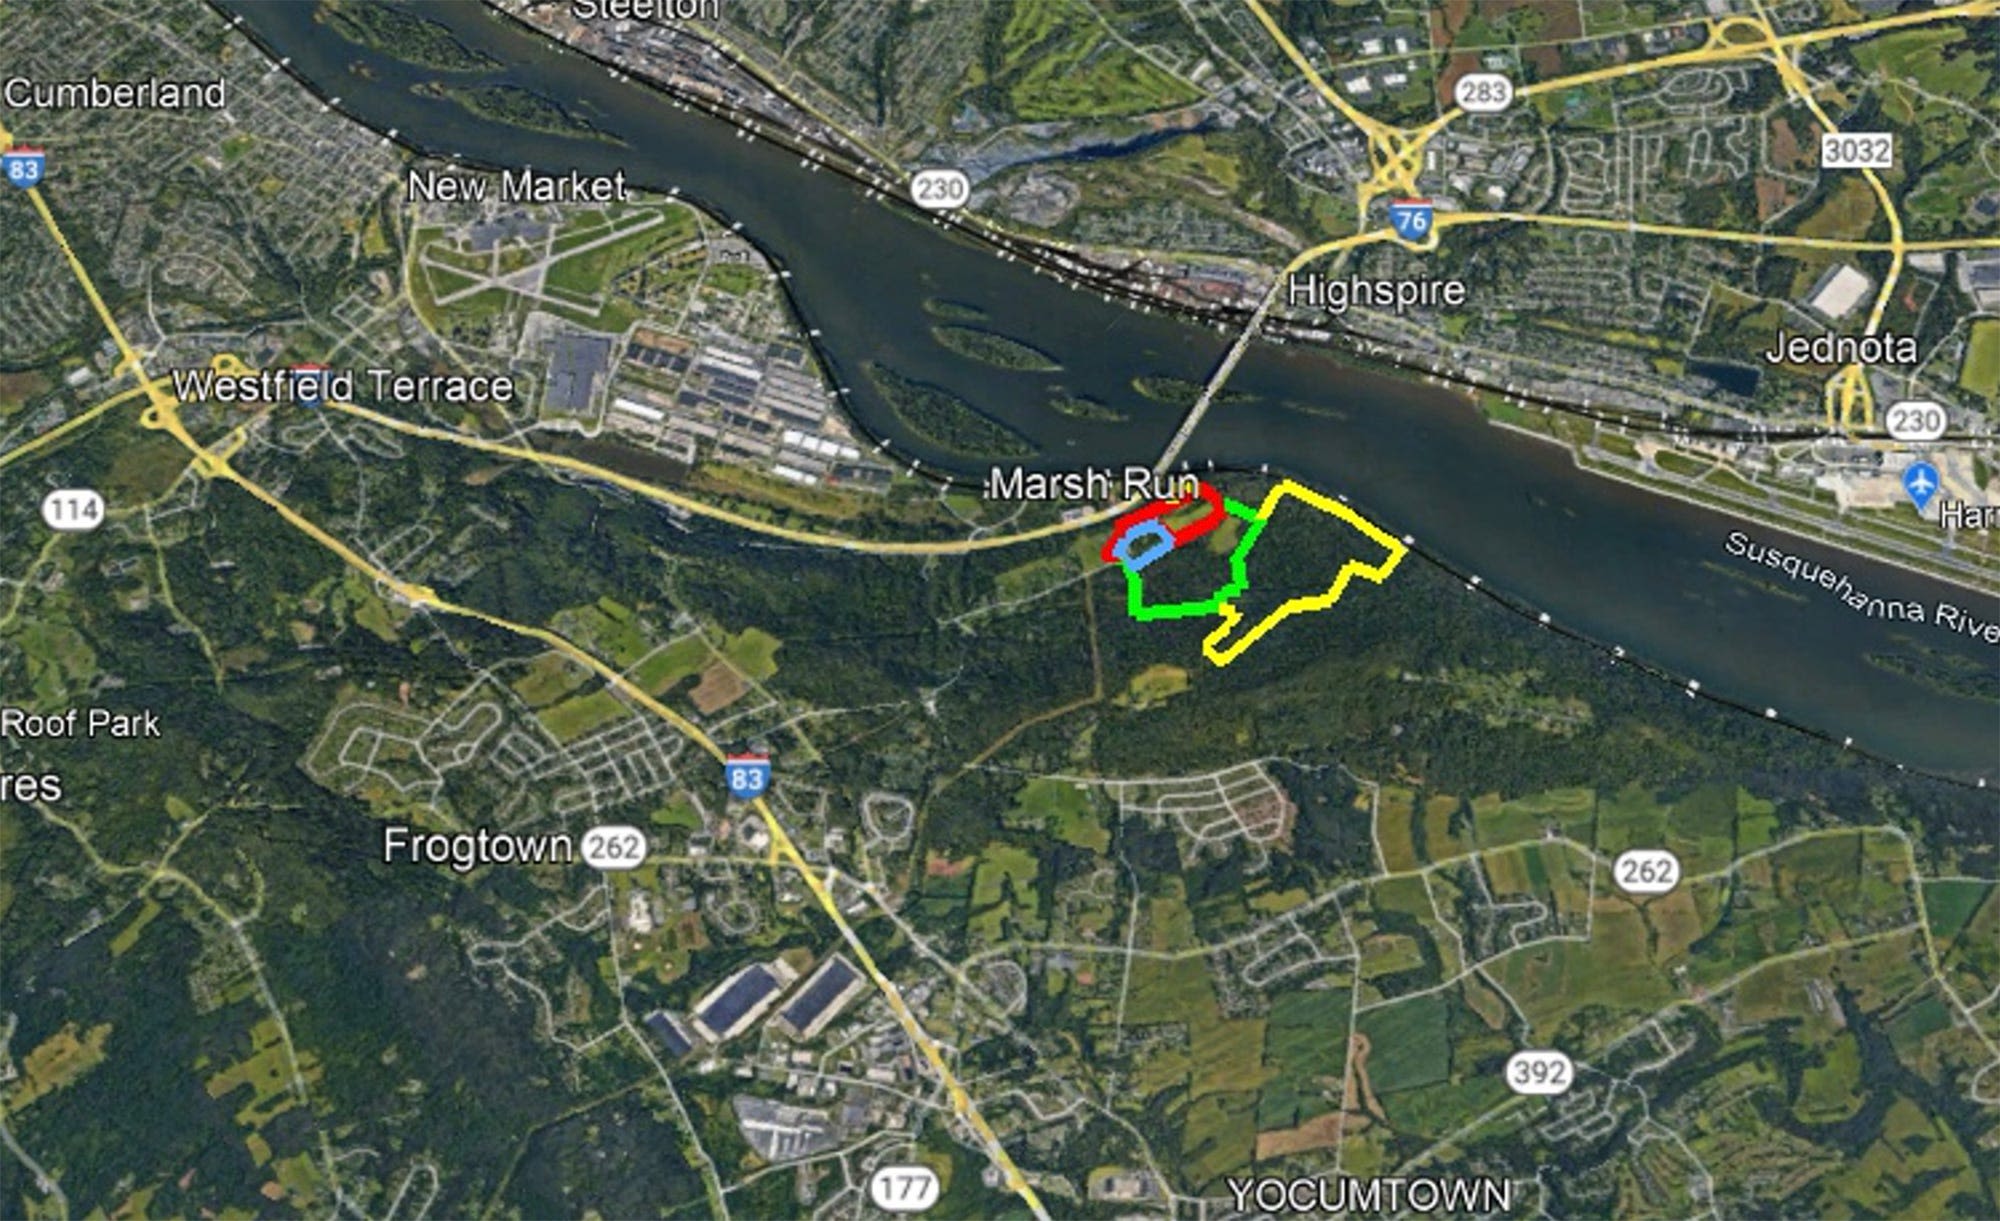 New park planned along the Susquehanna River in northern York County